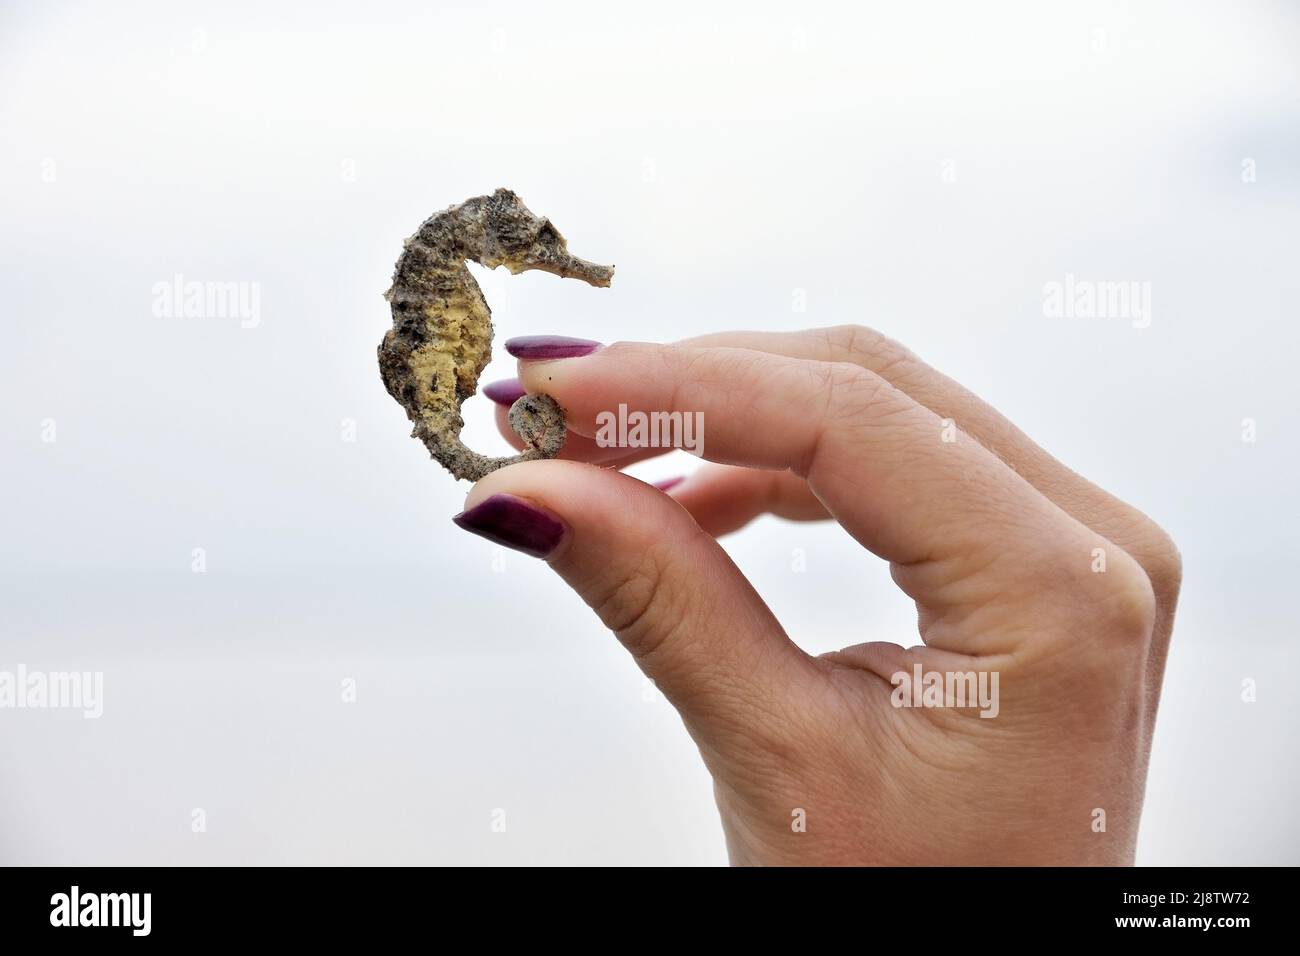 Dried, salty seahorse in the hands of a girl Stock Photo